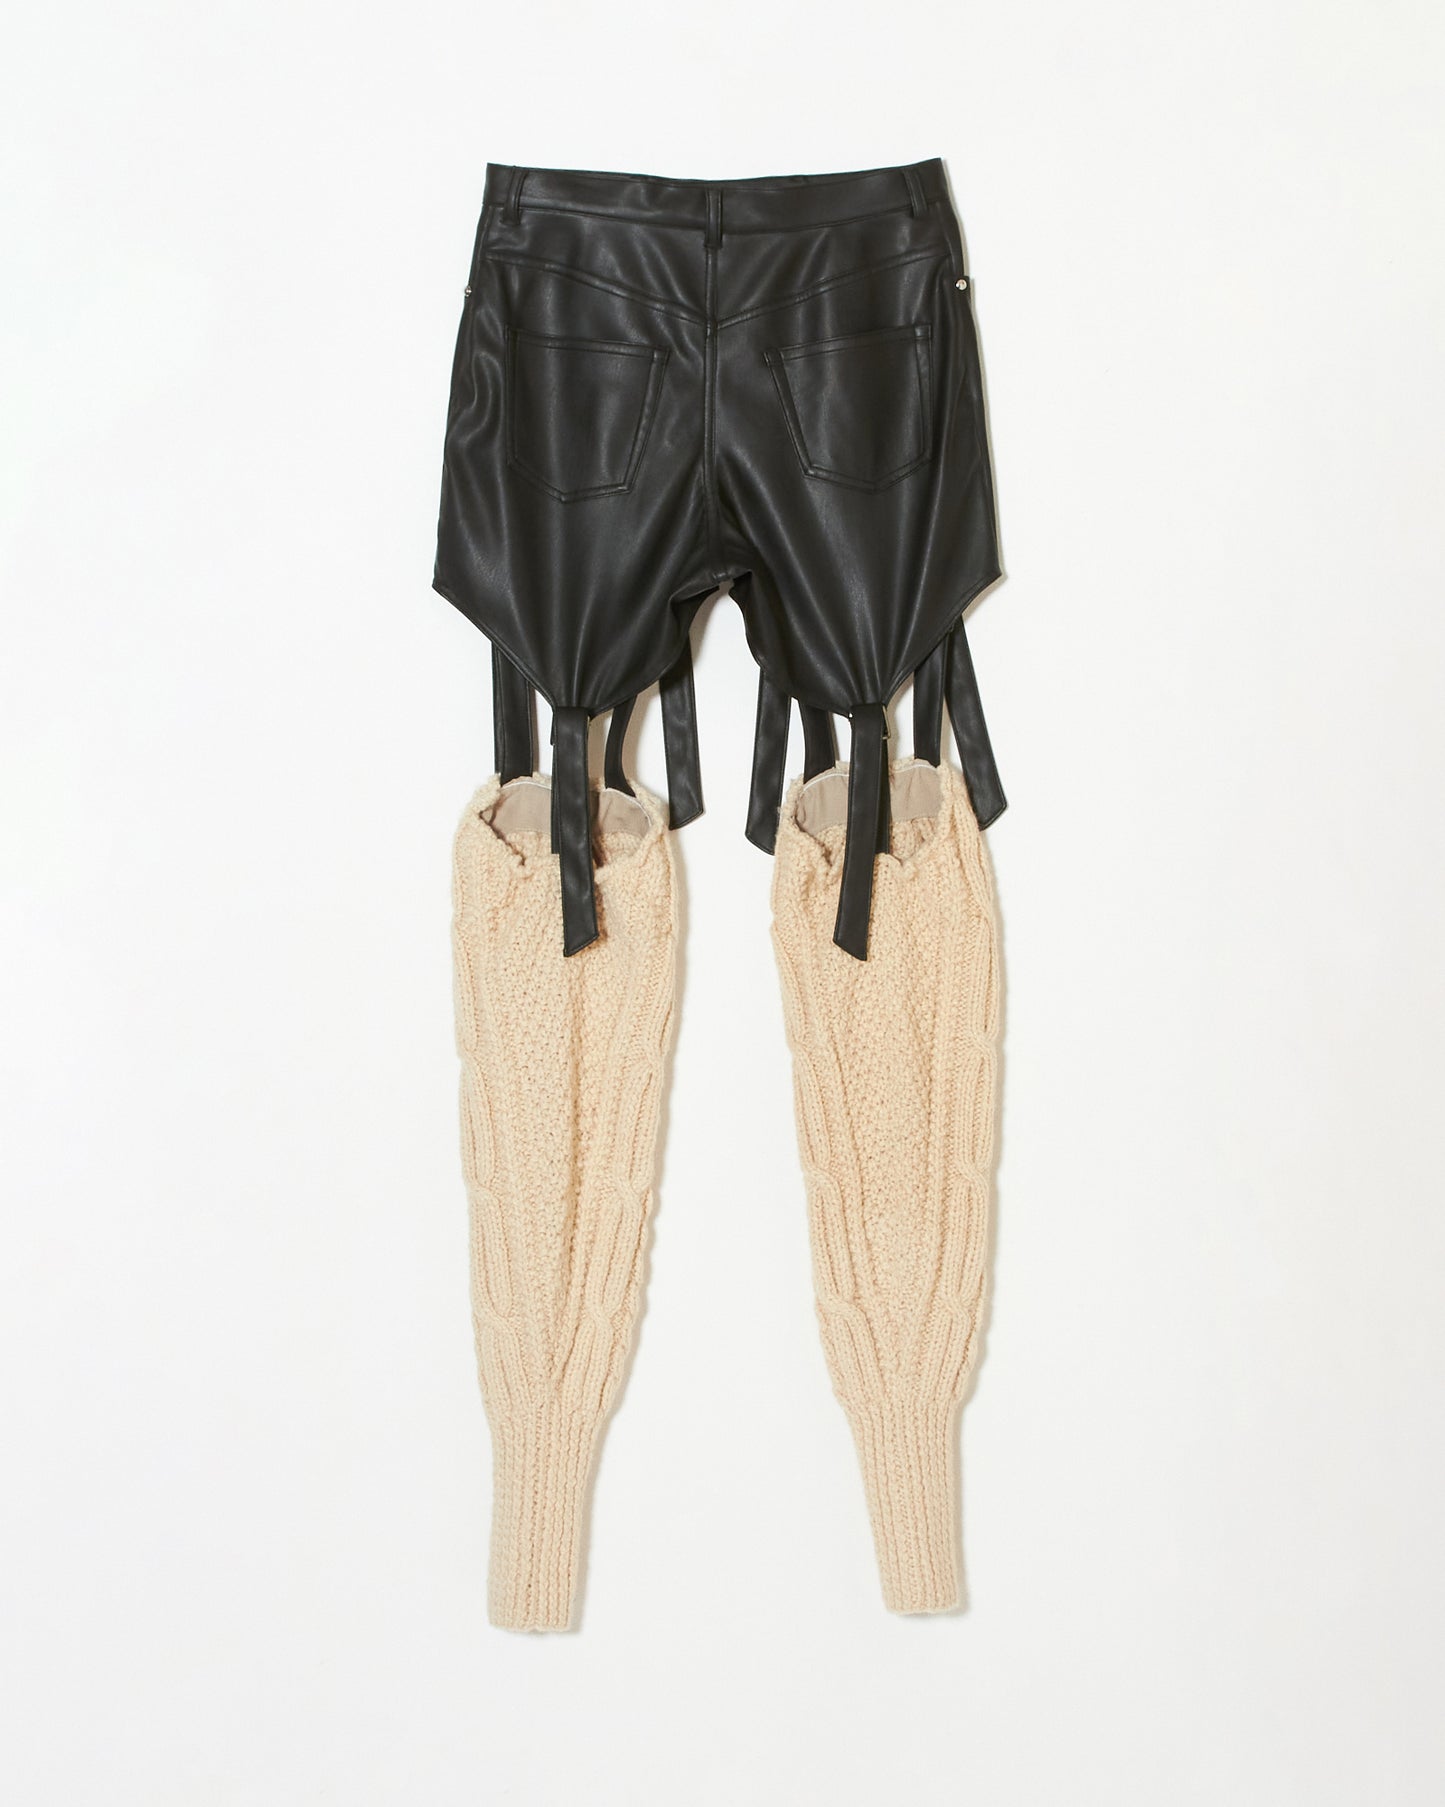 cable knit leather pants【Delivery in March 2023】